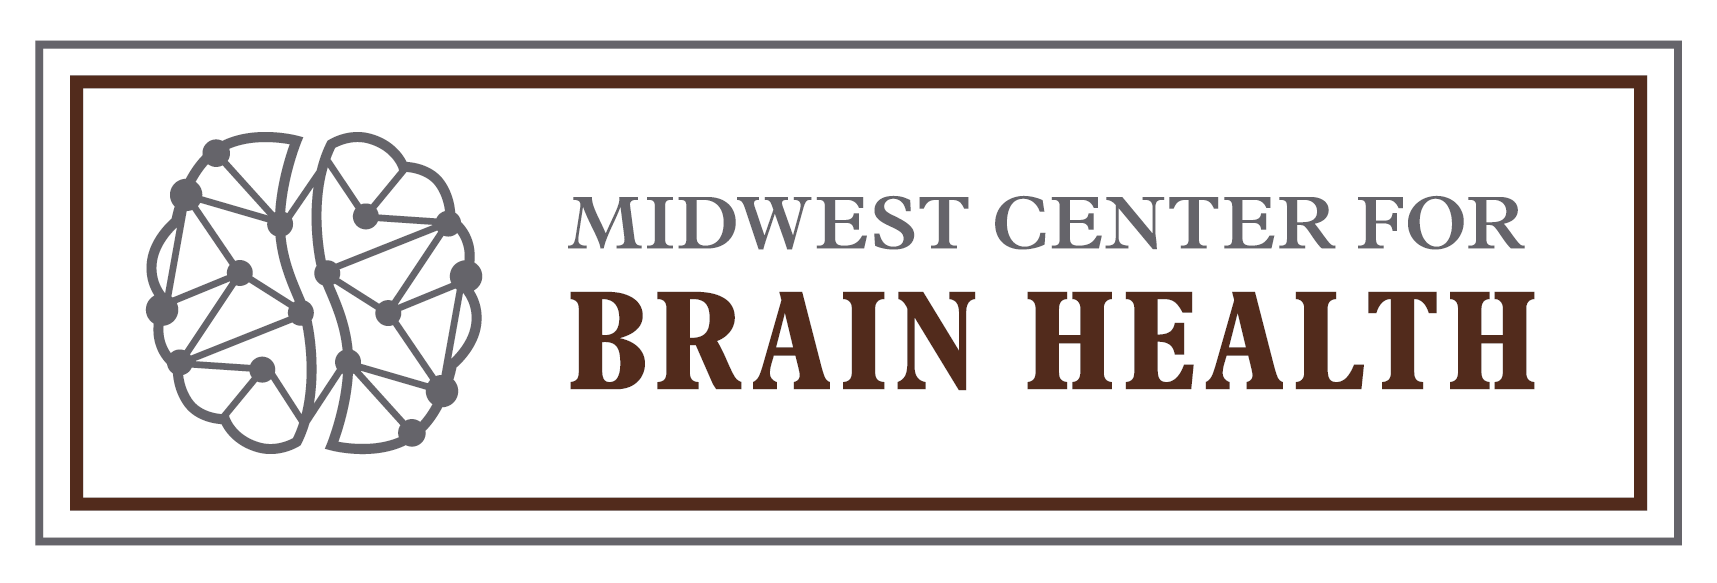 A. Midwest Center for Brain Health (Silver)